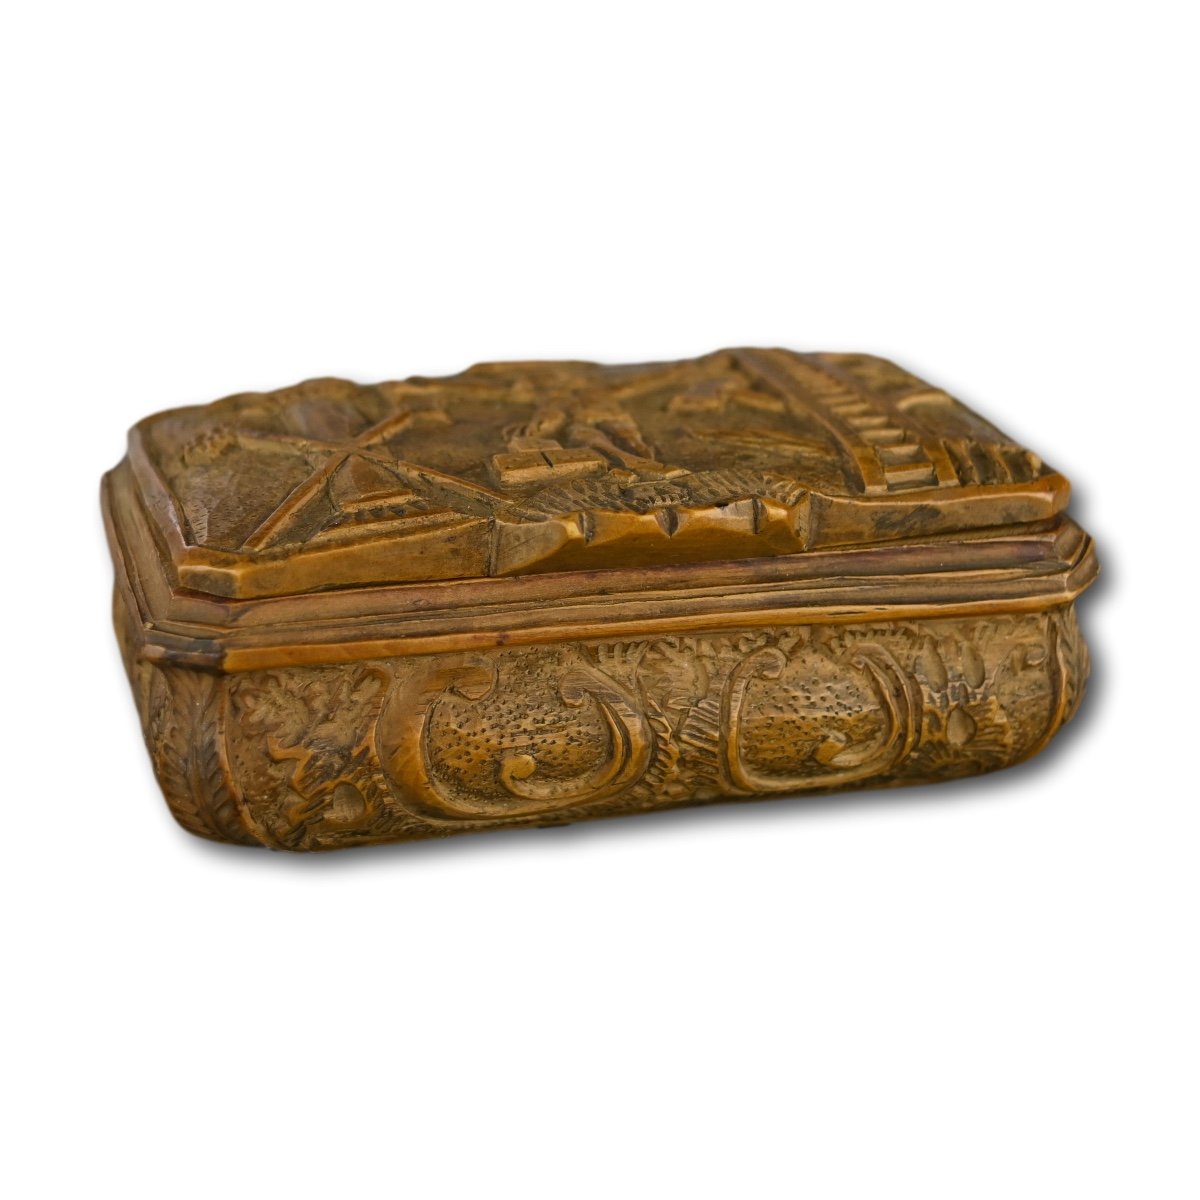 Boxwood Snuff Box Carved With The Crucifixion. German, 18th Century.-photo-1